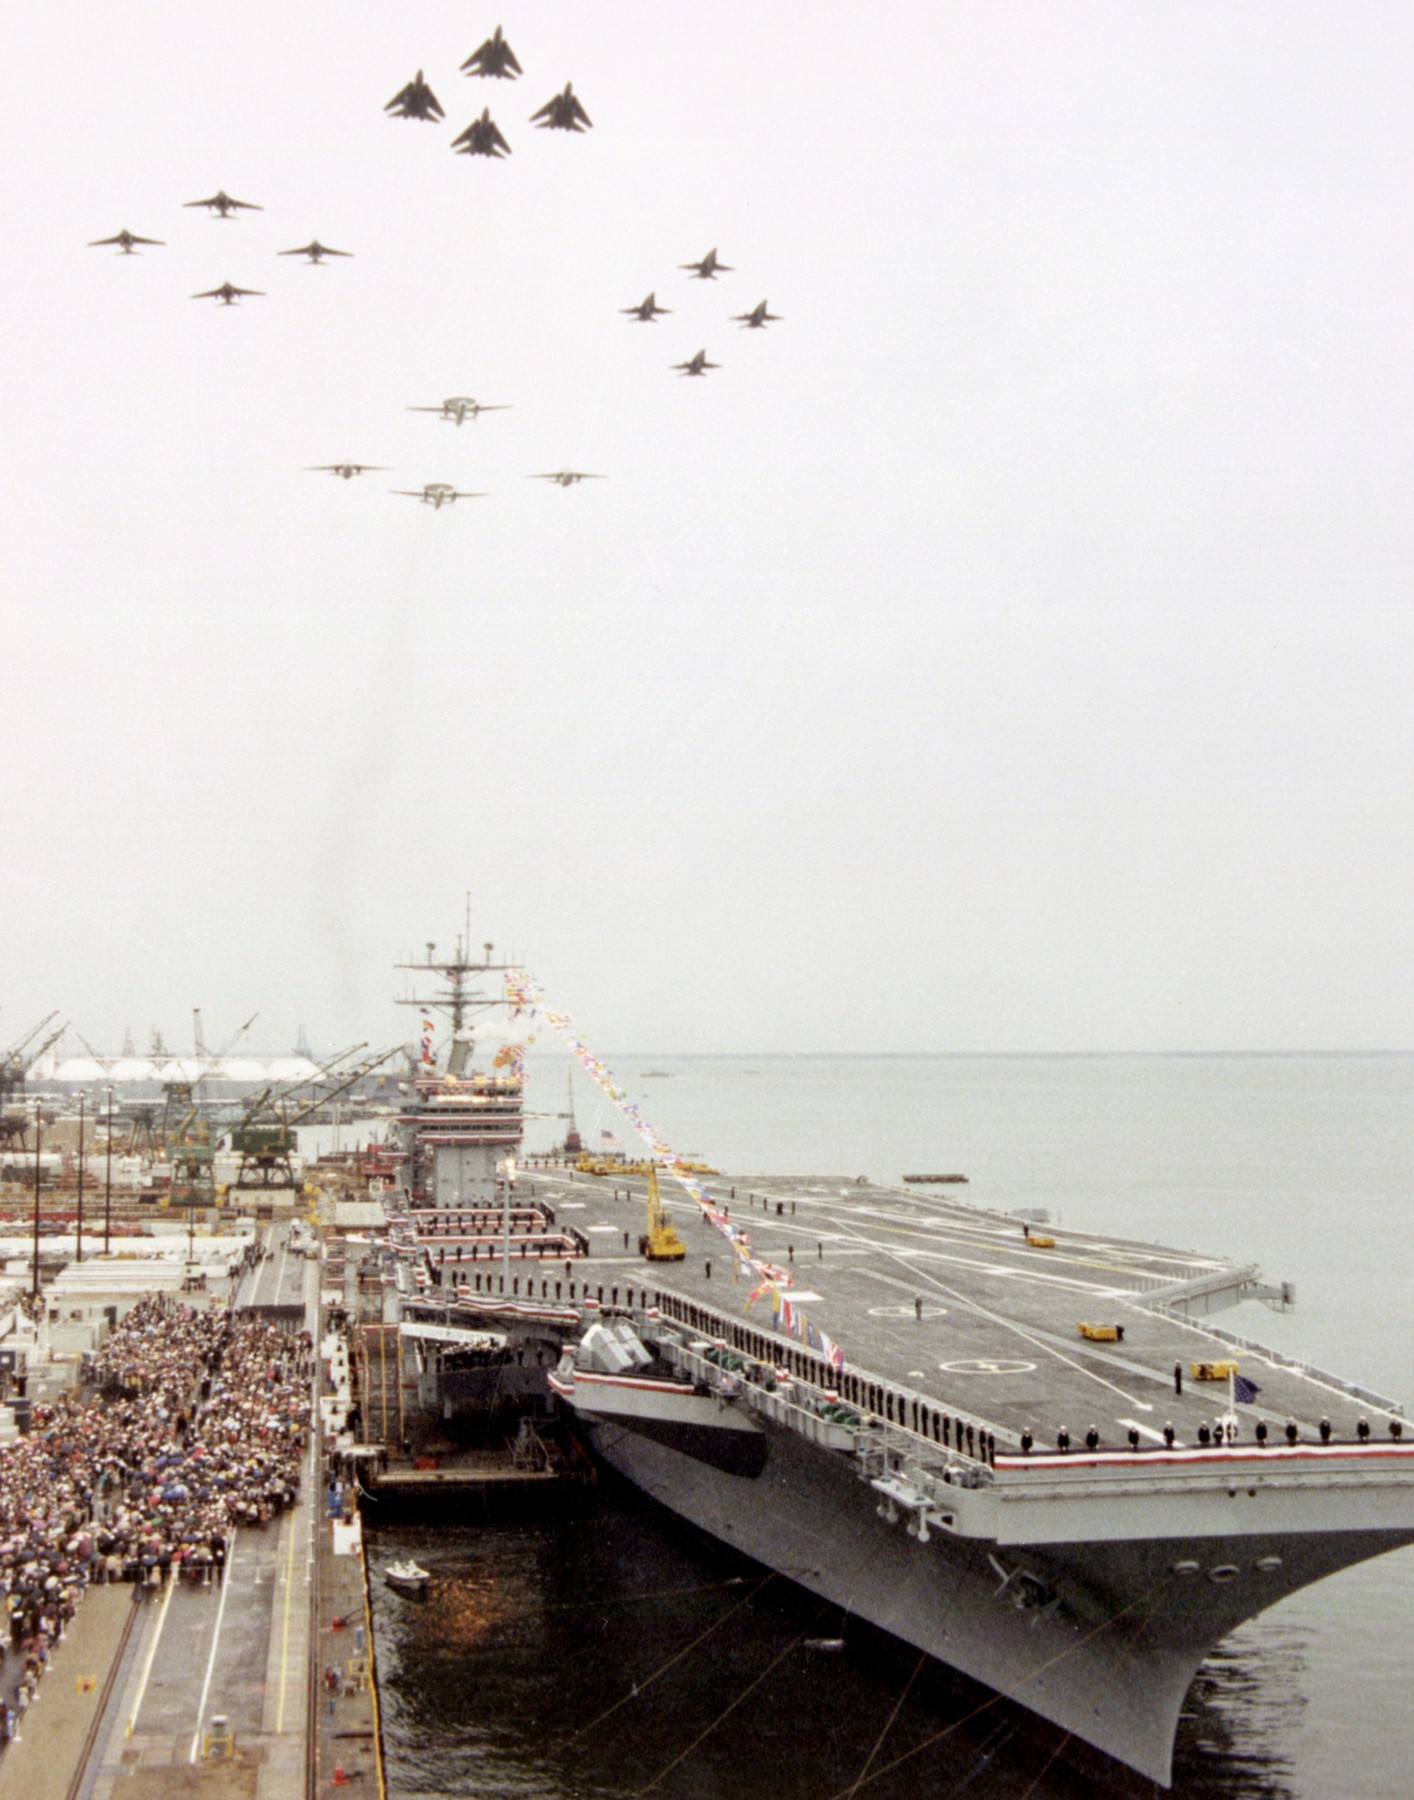 cvn-71 uss theodore roosevelt nimitz class aircraft carrier commissioning ceremony 1986 19